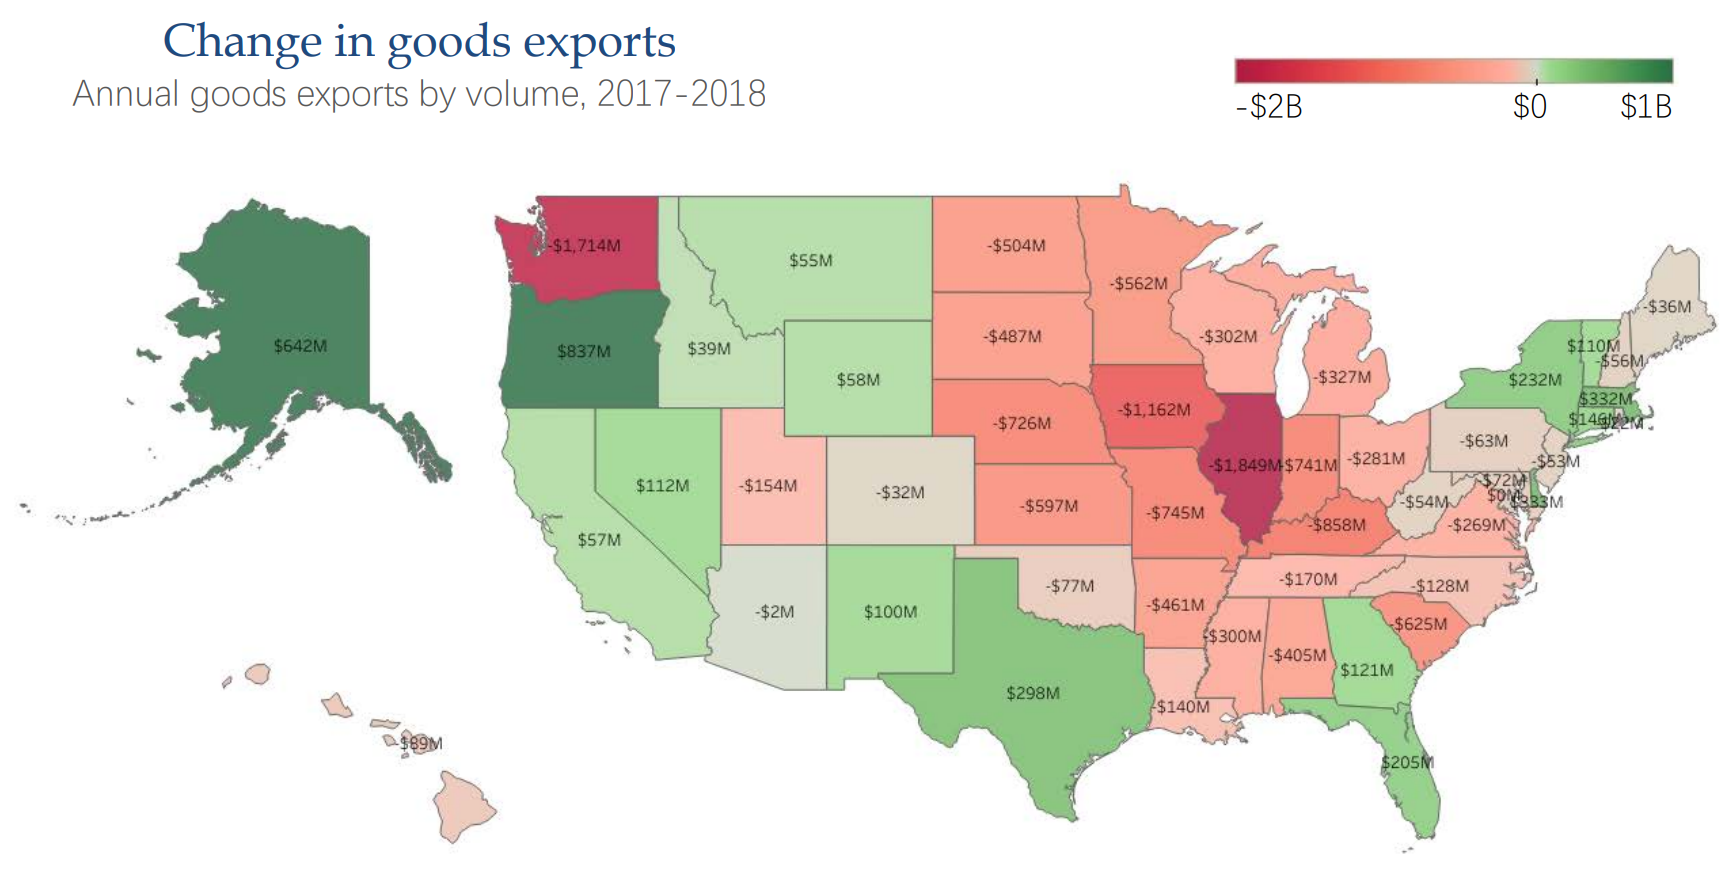 States whose top exports are steel and aluminum products, as well as agriculture products to China, were hit the worst.